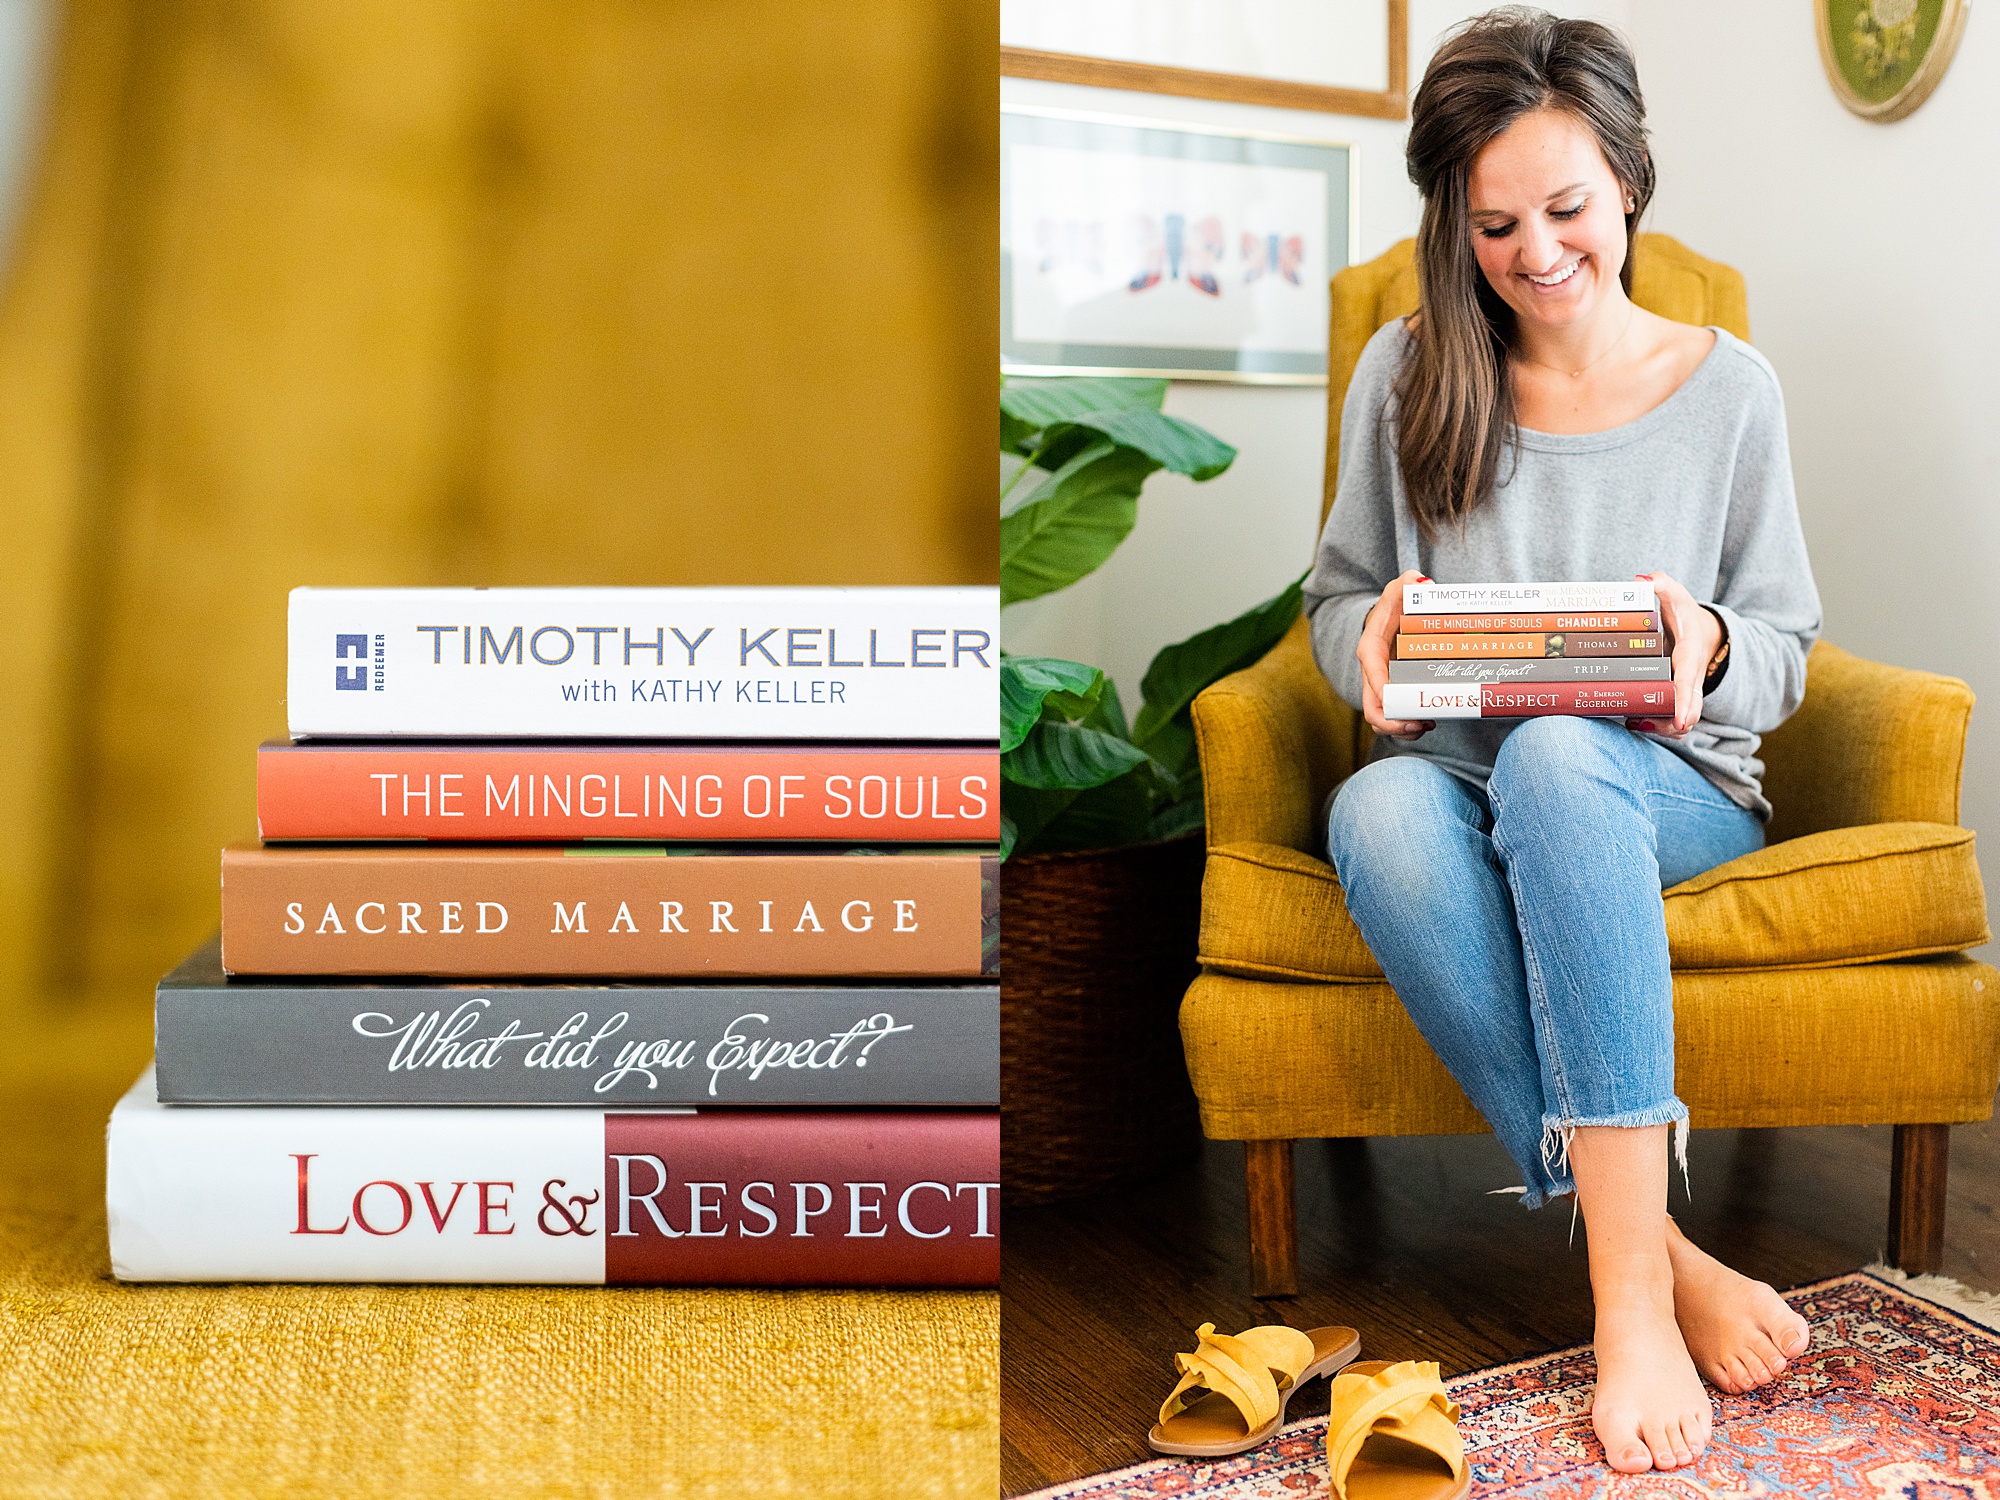 Eleanor Stenner Photography - a Birmingham, AL wedding photographer - shares her list of 10 books engaged couples should read